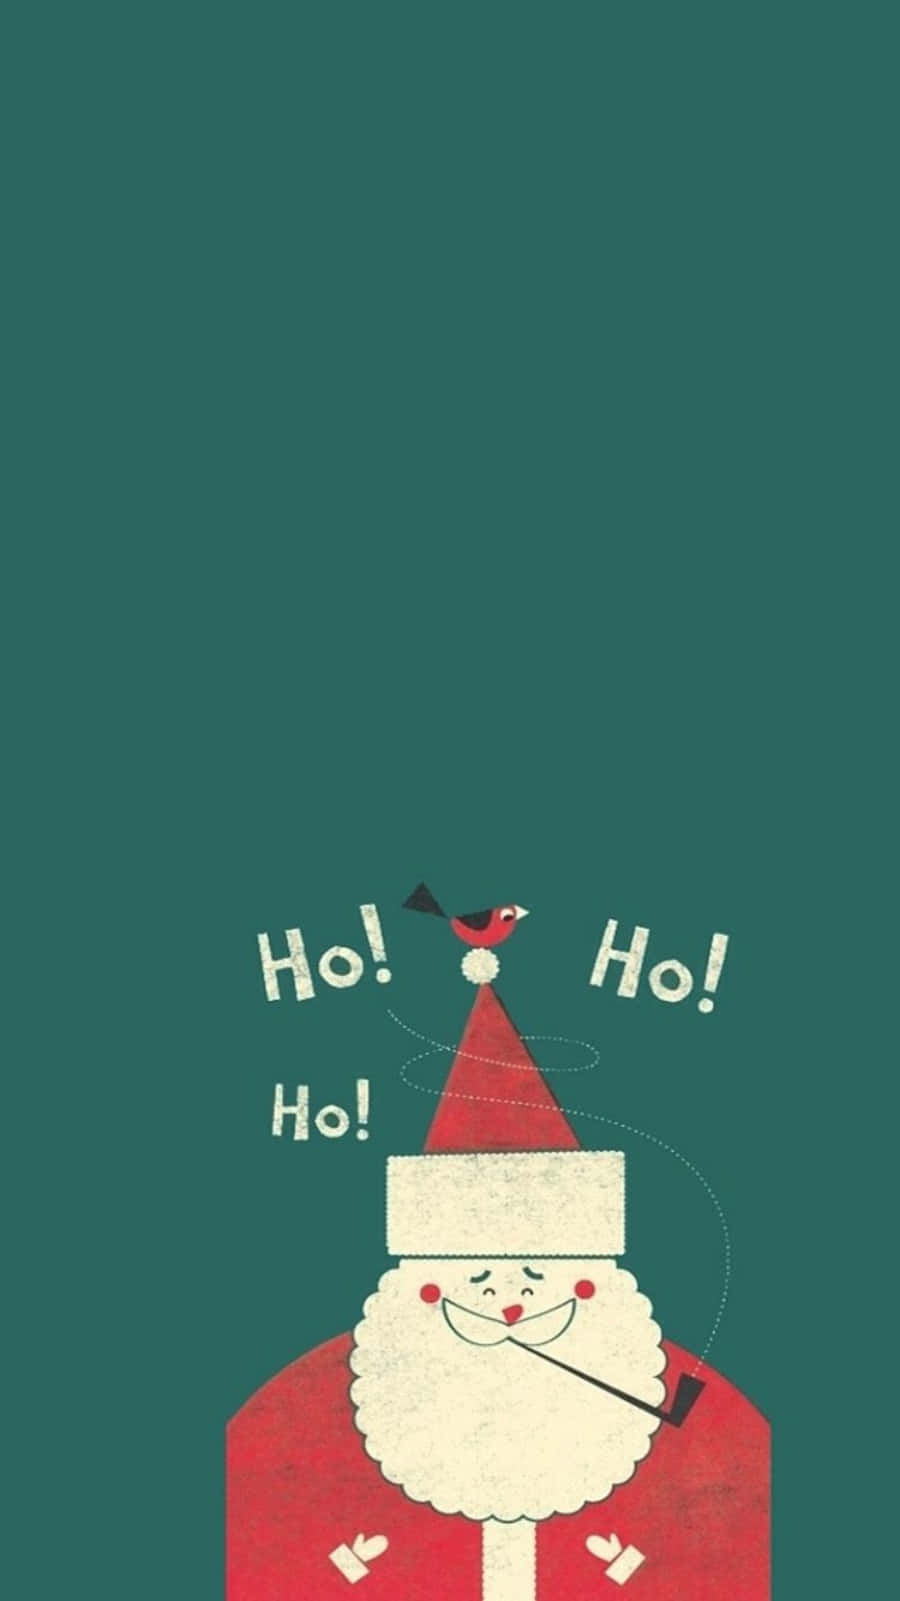 Spread the Christmas cheer! Wallpaper